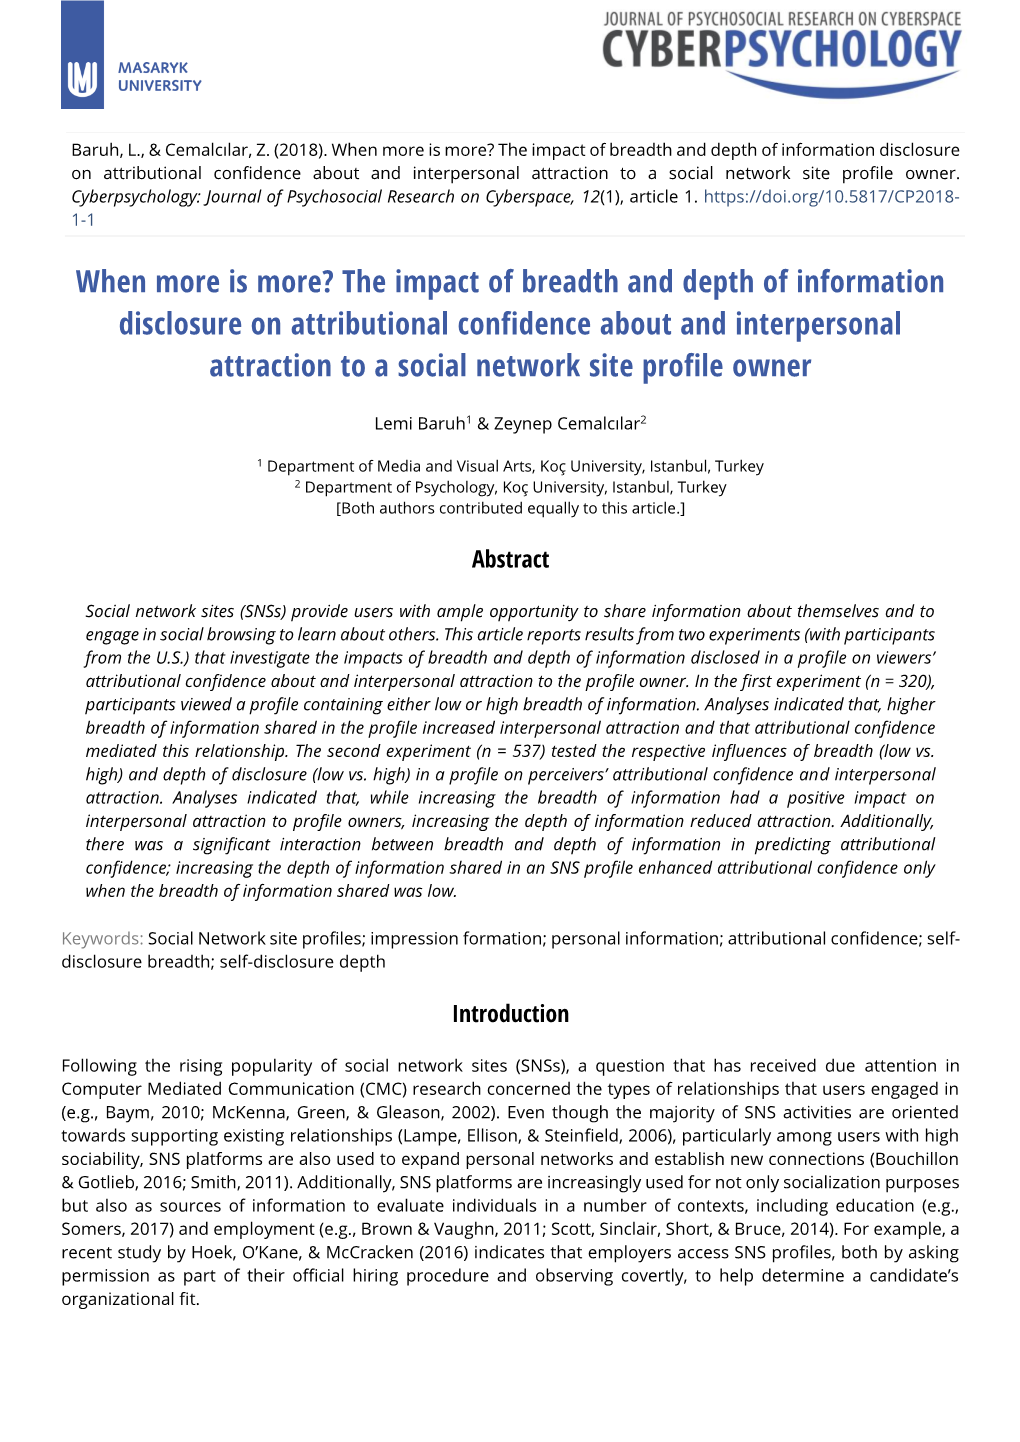 The Impact of Breadth and Depth of Information Disclosure on Attributional Confidence About and Interpersonal Attraction to a Social Network Site Profile Owner